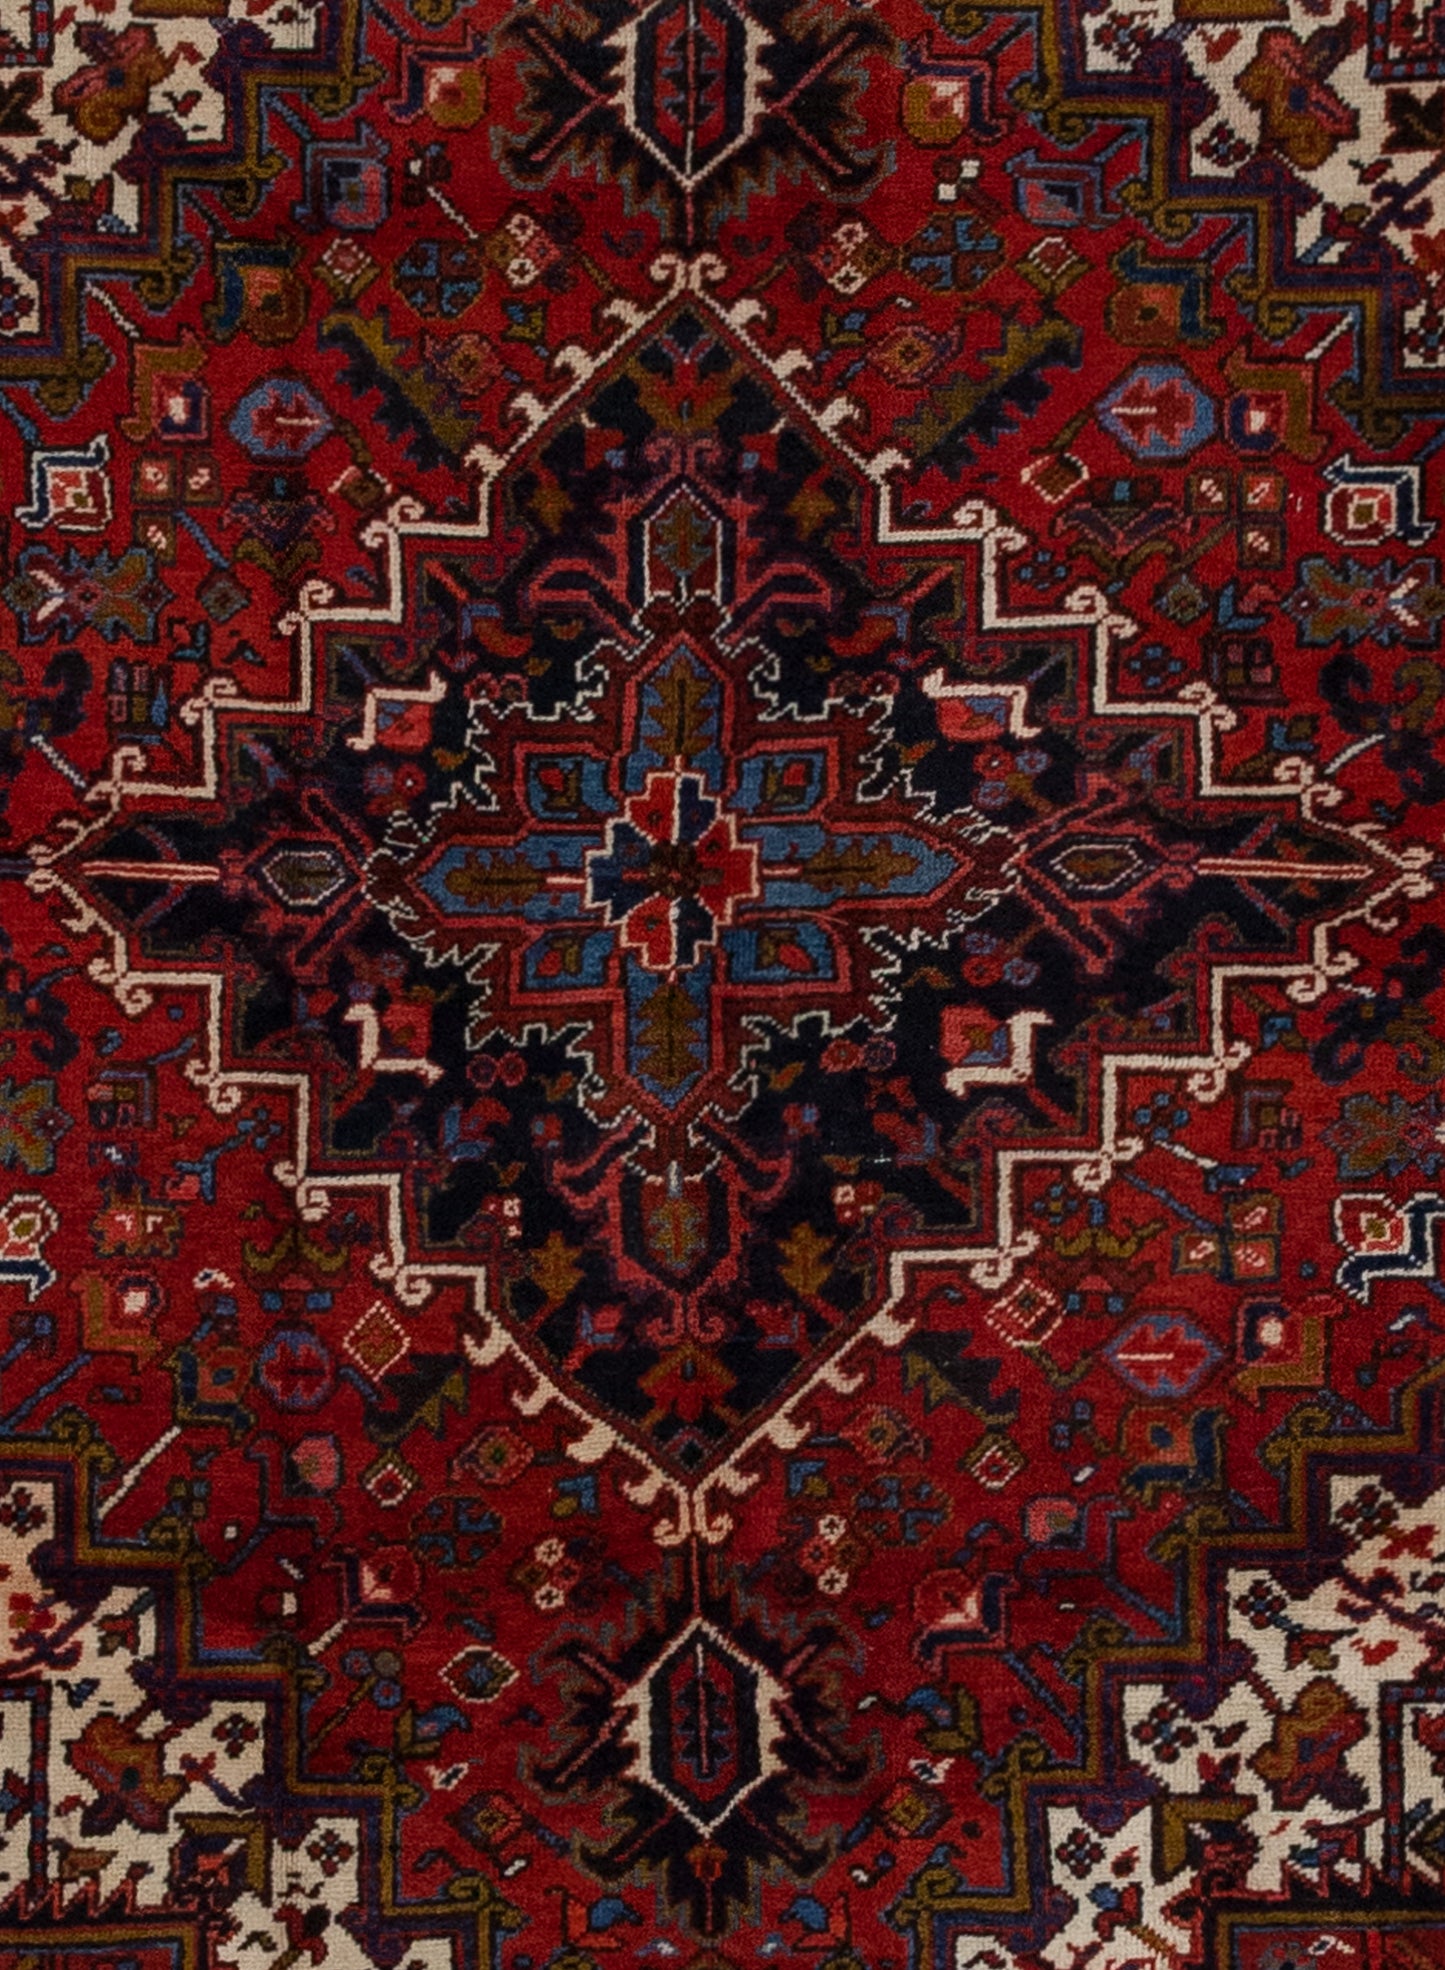 The close-up of the carpet renders geometrical central rhombuses with a lot of detail in different colors.